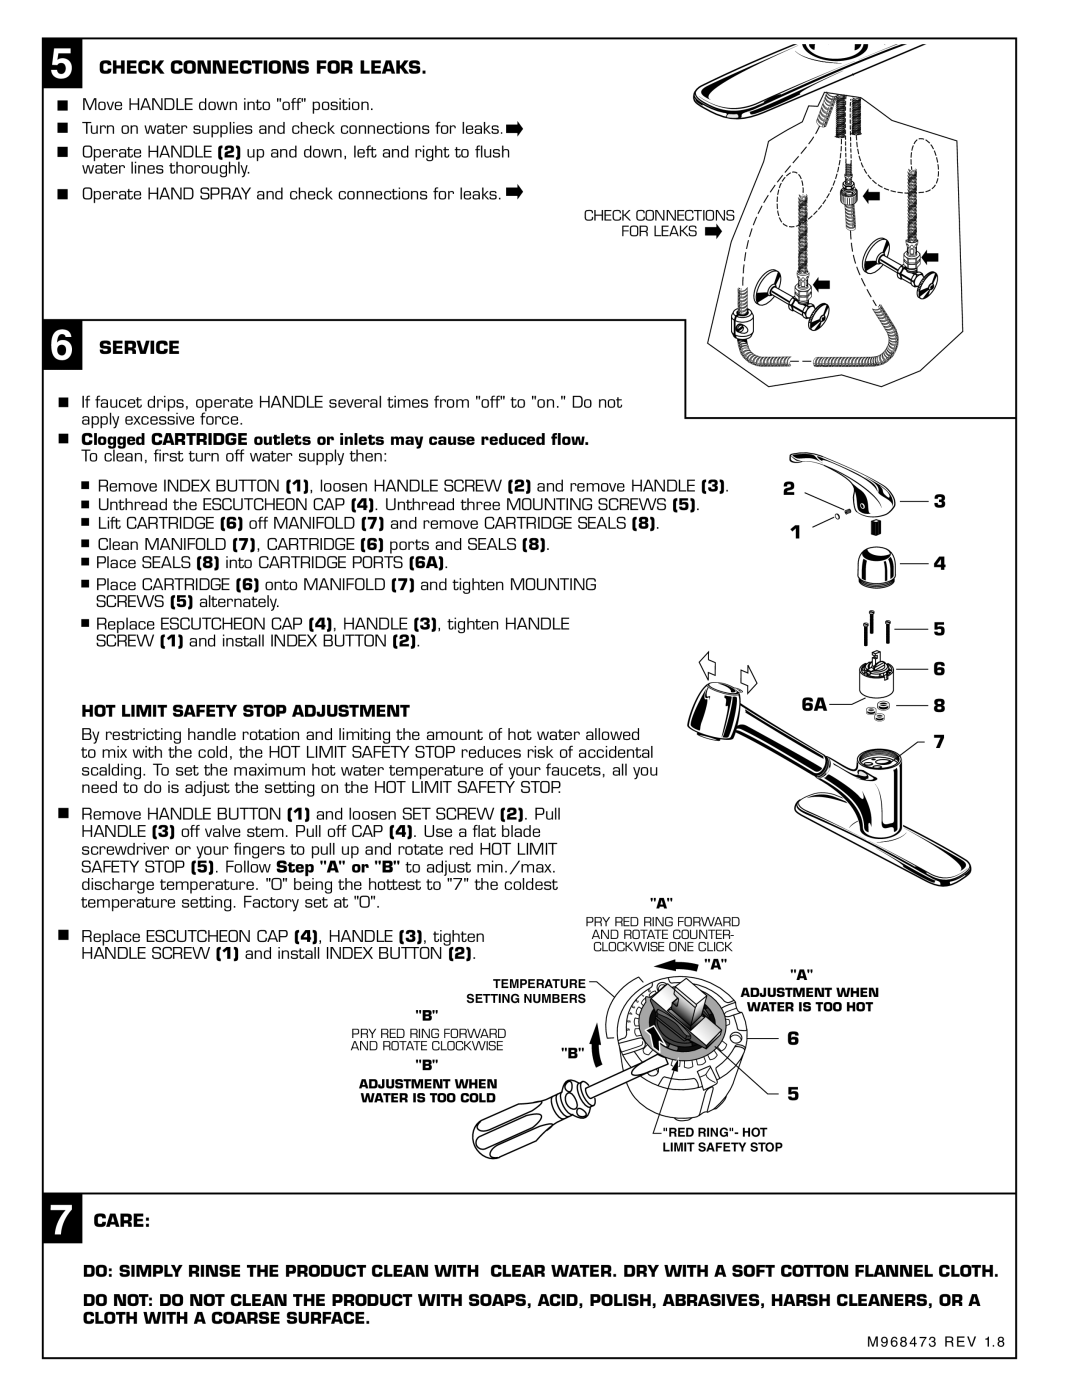 American Standard Single Control Kitchen Pull-Out Faucet, M968473 Check Connections For Leaks, Service, Care 